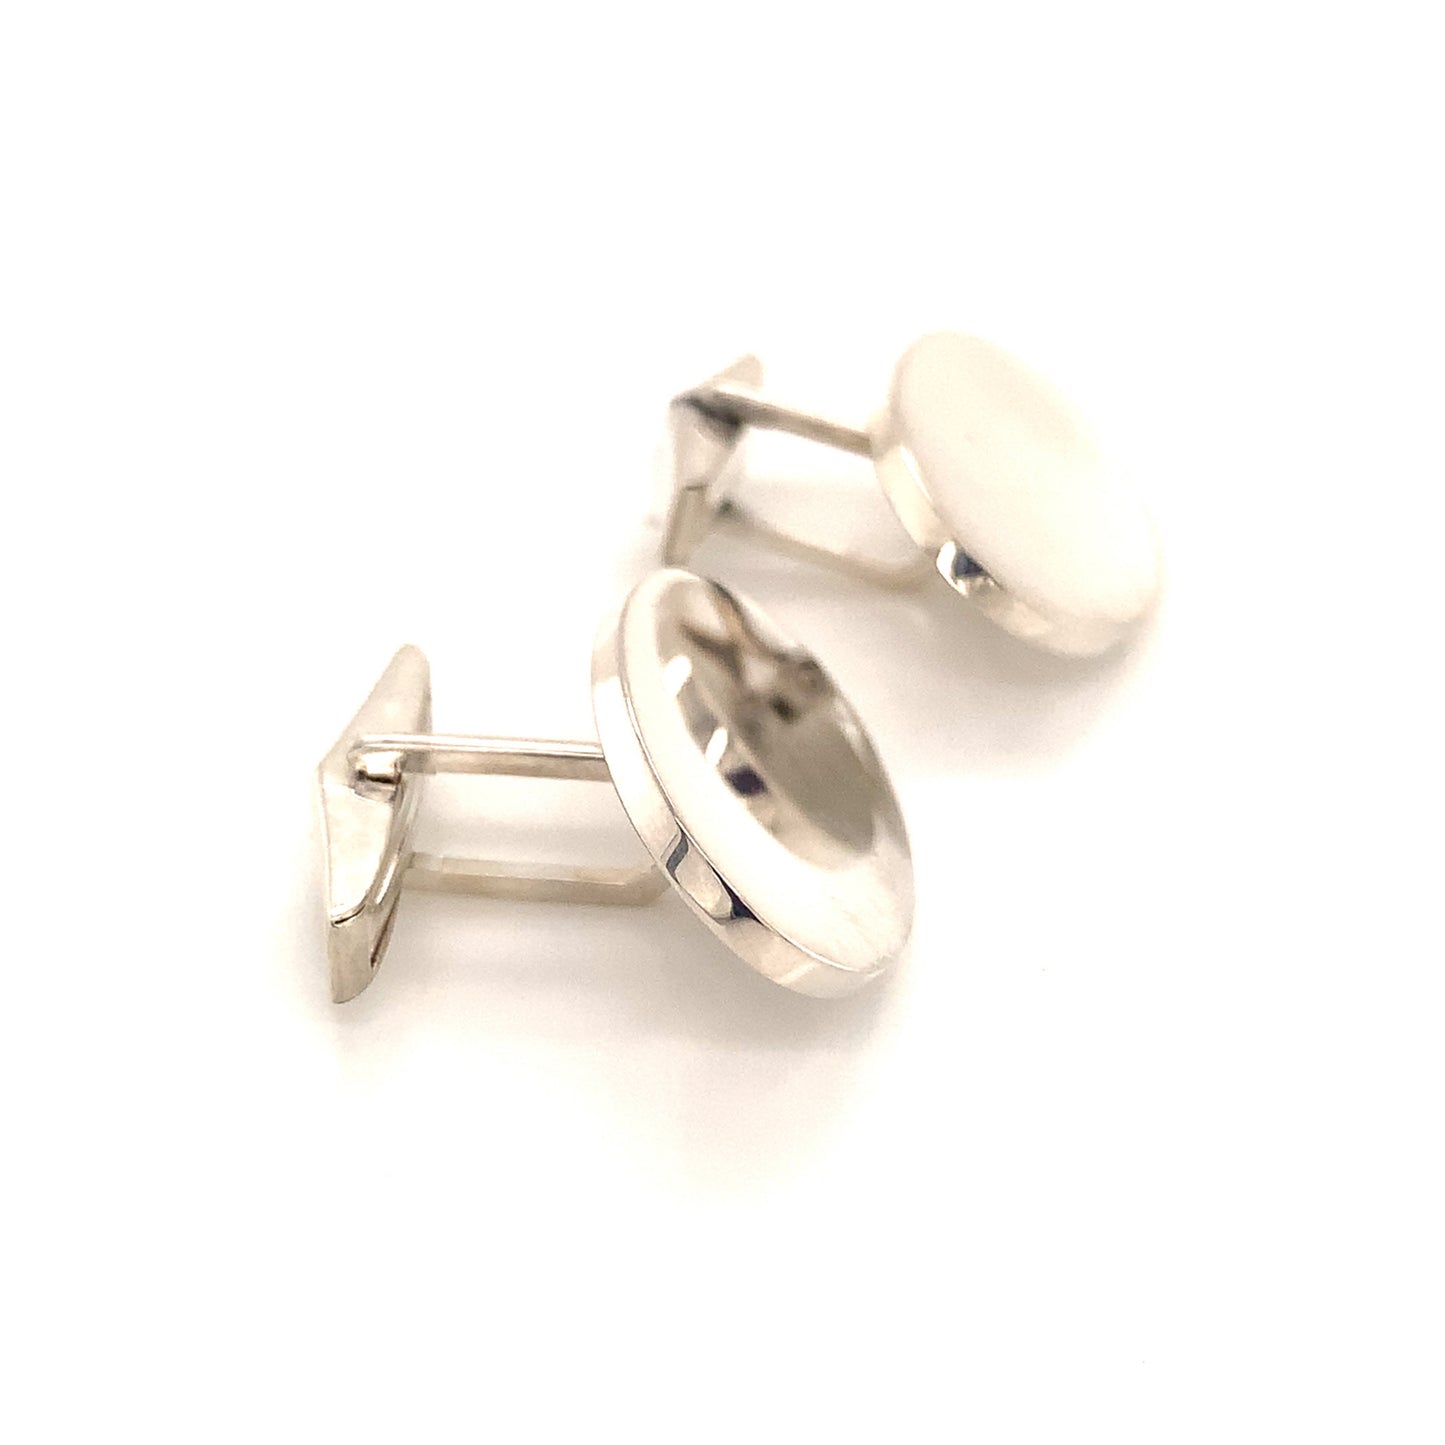 Tiffany & Co Estate Sterling Silver Extra Wide Oval Cufflinks 18 Grams TIF629